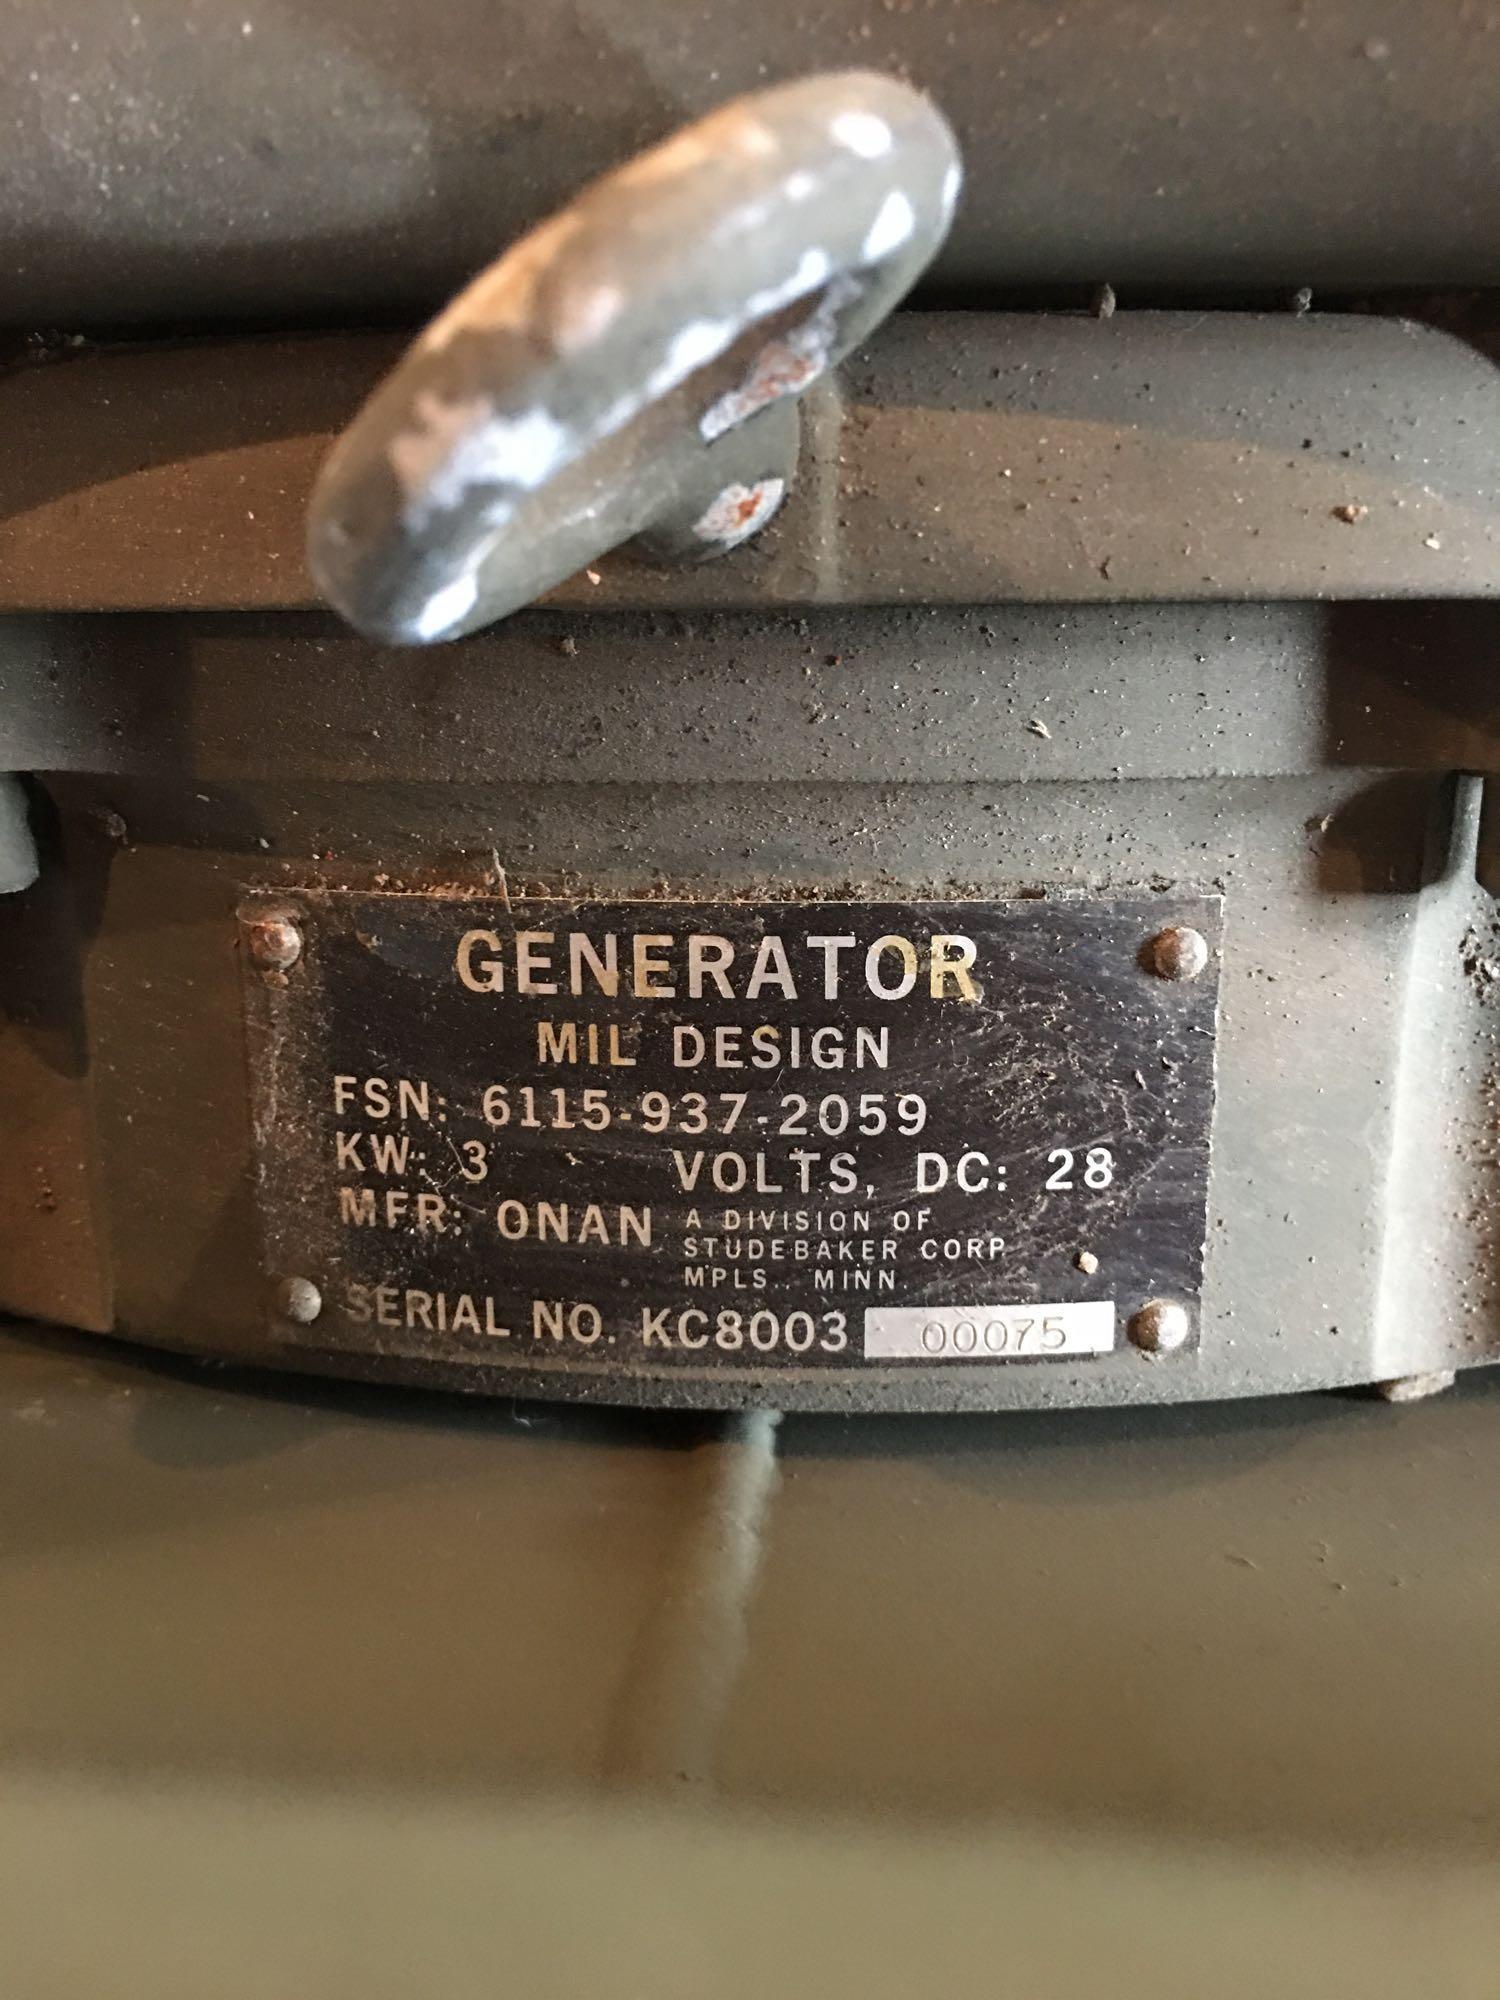 Military Standard Generator 3 KW 28 Volts DC 4 Cylinder Air Cooled, with manual and cover